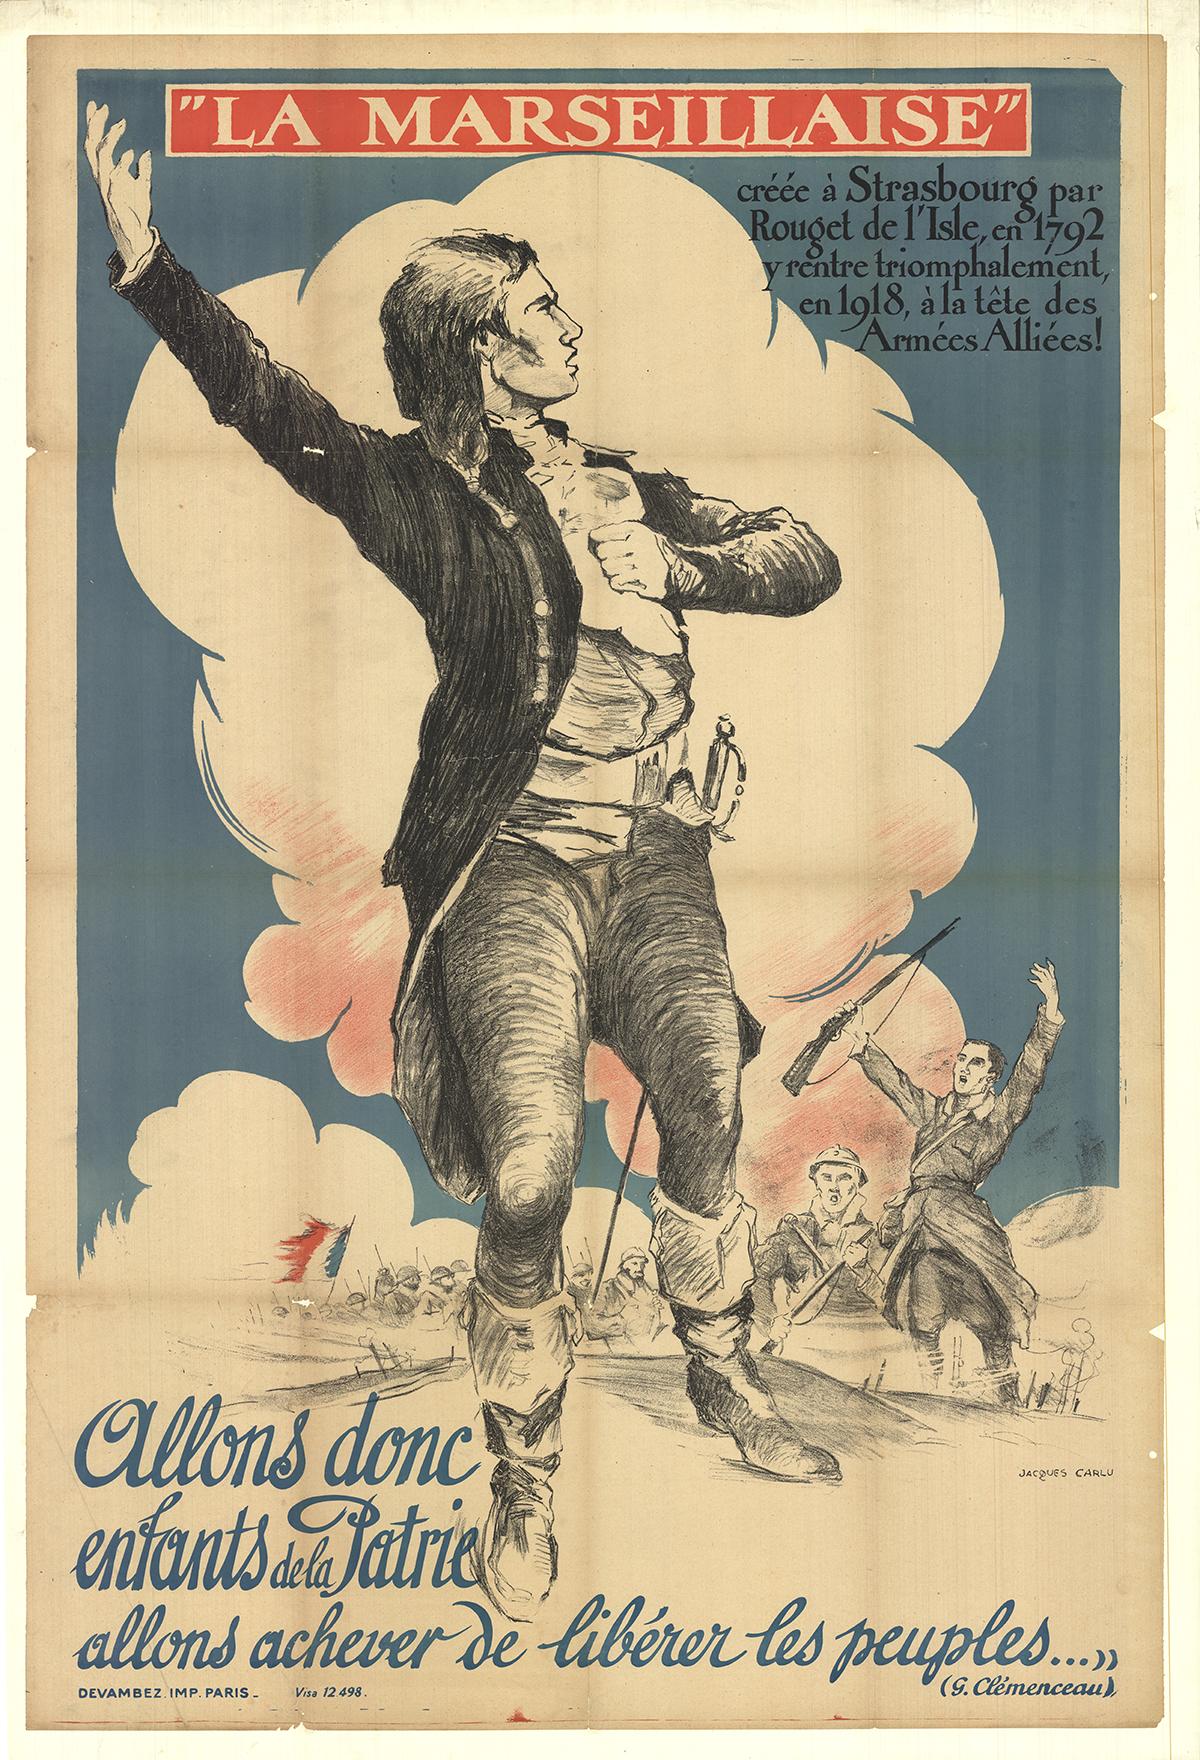 Sku: EF5549-D
Artist: Jacques Carlu
Title: La Marseillaise
Year: 1915
Signed: No
Medium: Lithograph
Paper Size: 49 x 33.5 inches ( 124.46 x 85.09 cm )
Image Size: 47 x 31.5 inches ( 119.38 x 80.01 cm )
Edition Size: Unknown
Framed: No
Condition: B: